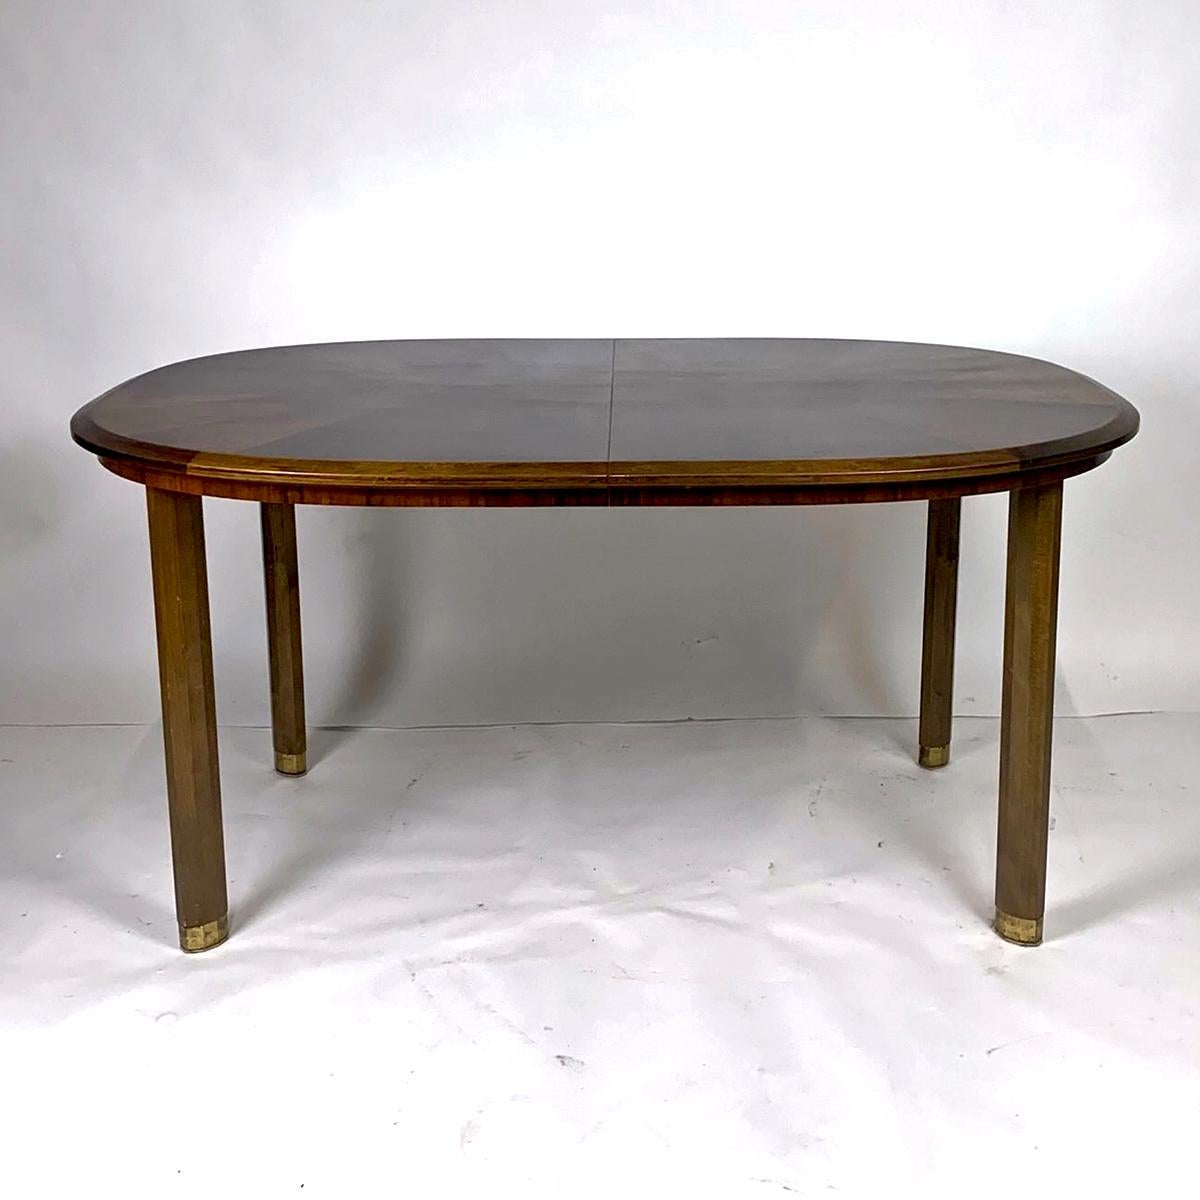 Edmond J. Spence Mixed Wood Oval Extension Dining Table w Burled Elm & Walnut y 9